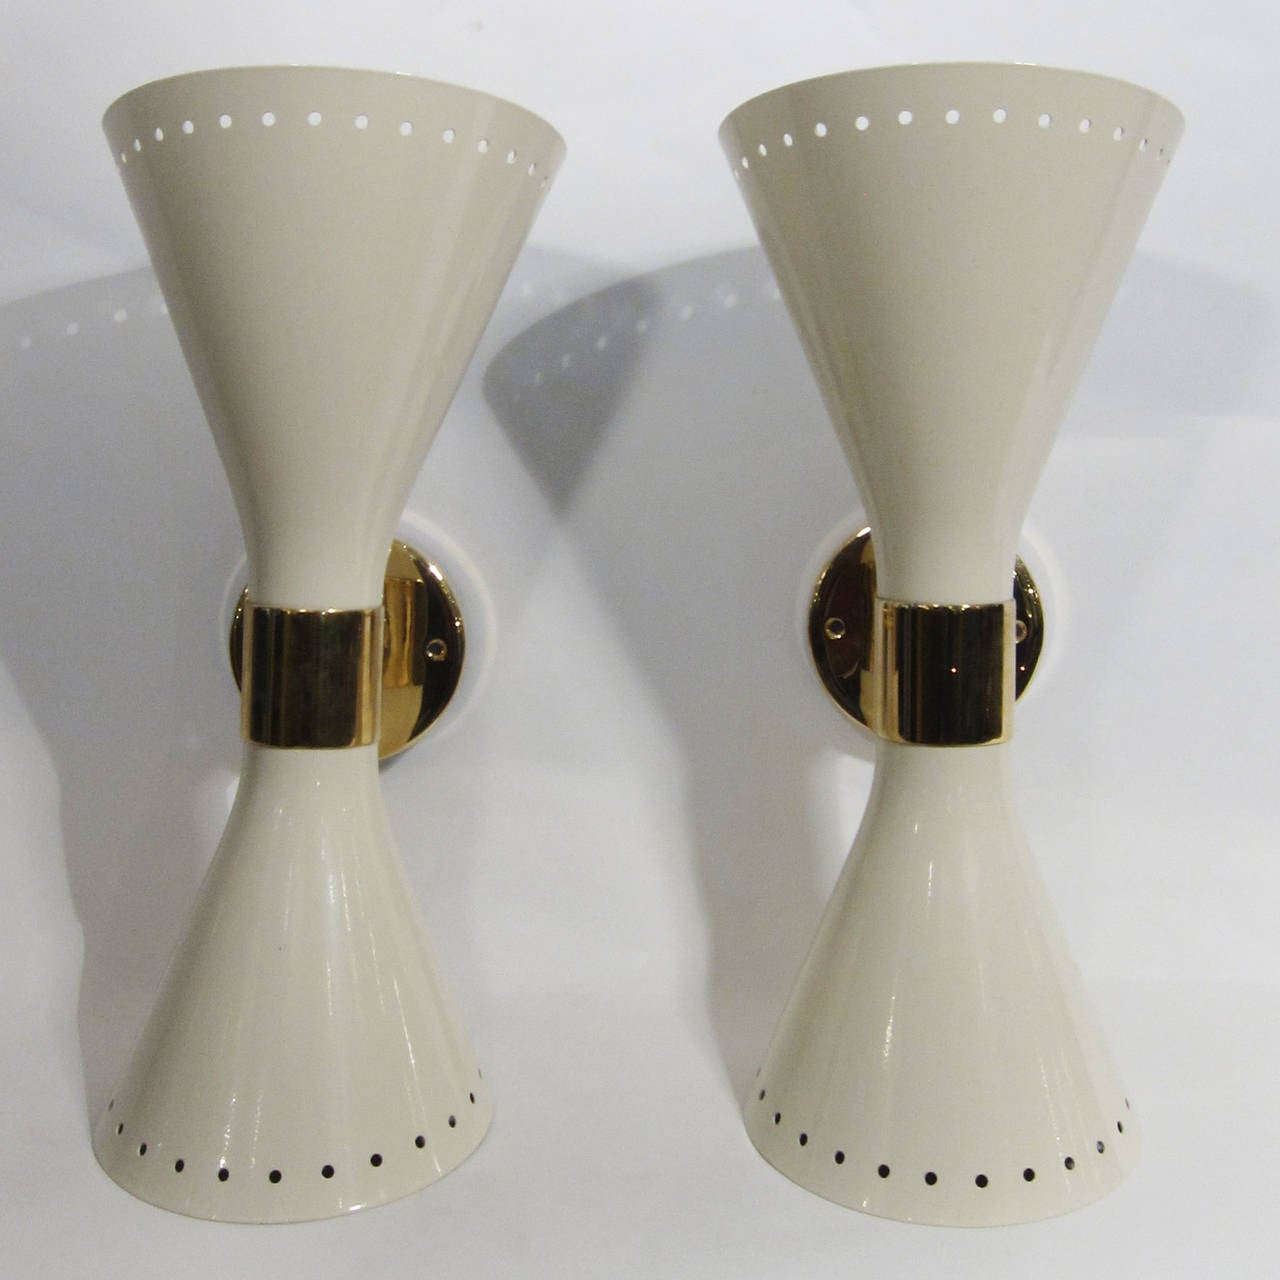 White enameled shades on brass structure. Italian design late 20th century.